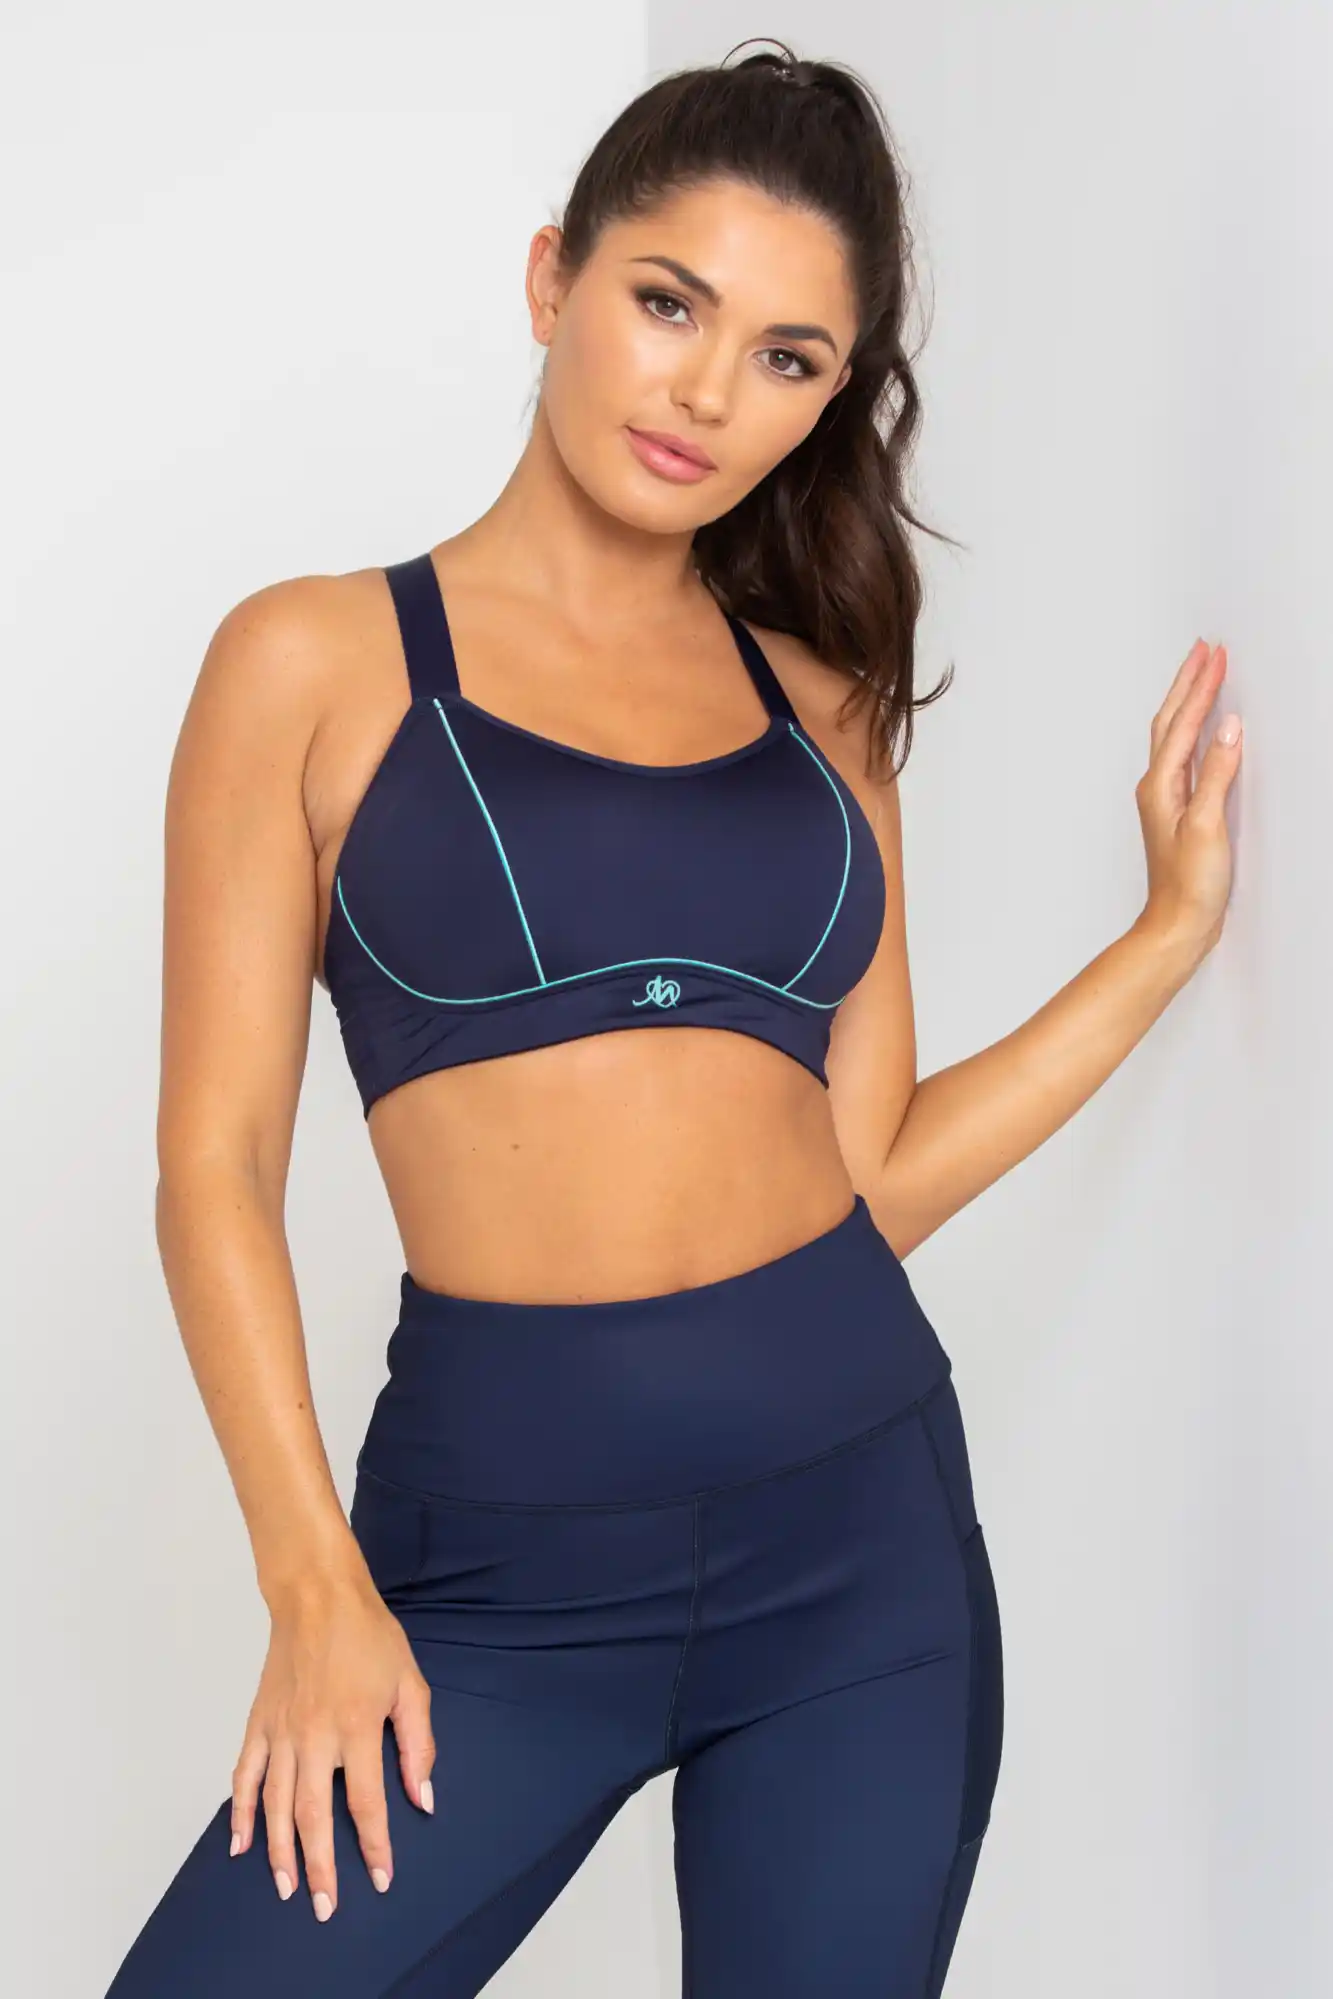 Pour Moi Energy Pulse Longline Underwired Lightly Padded Sports